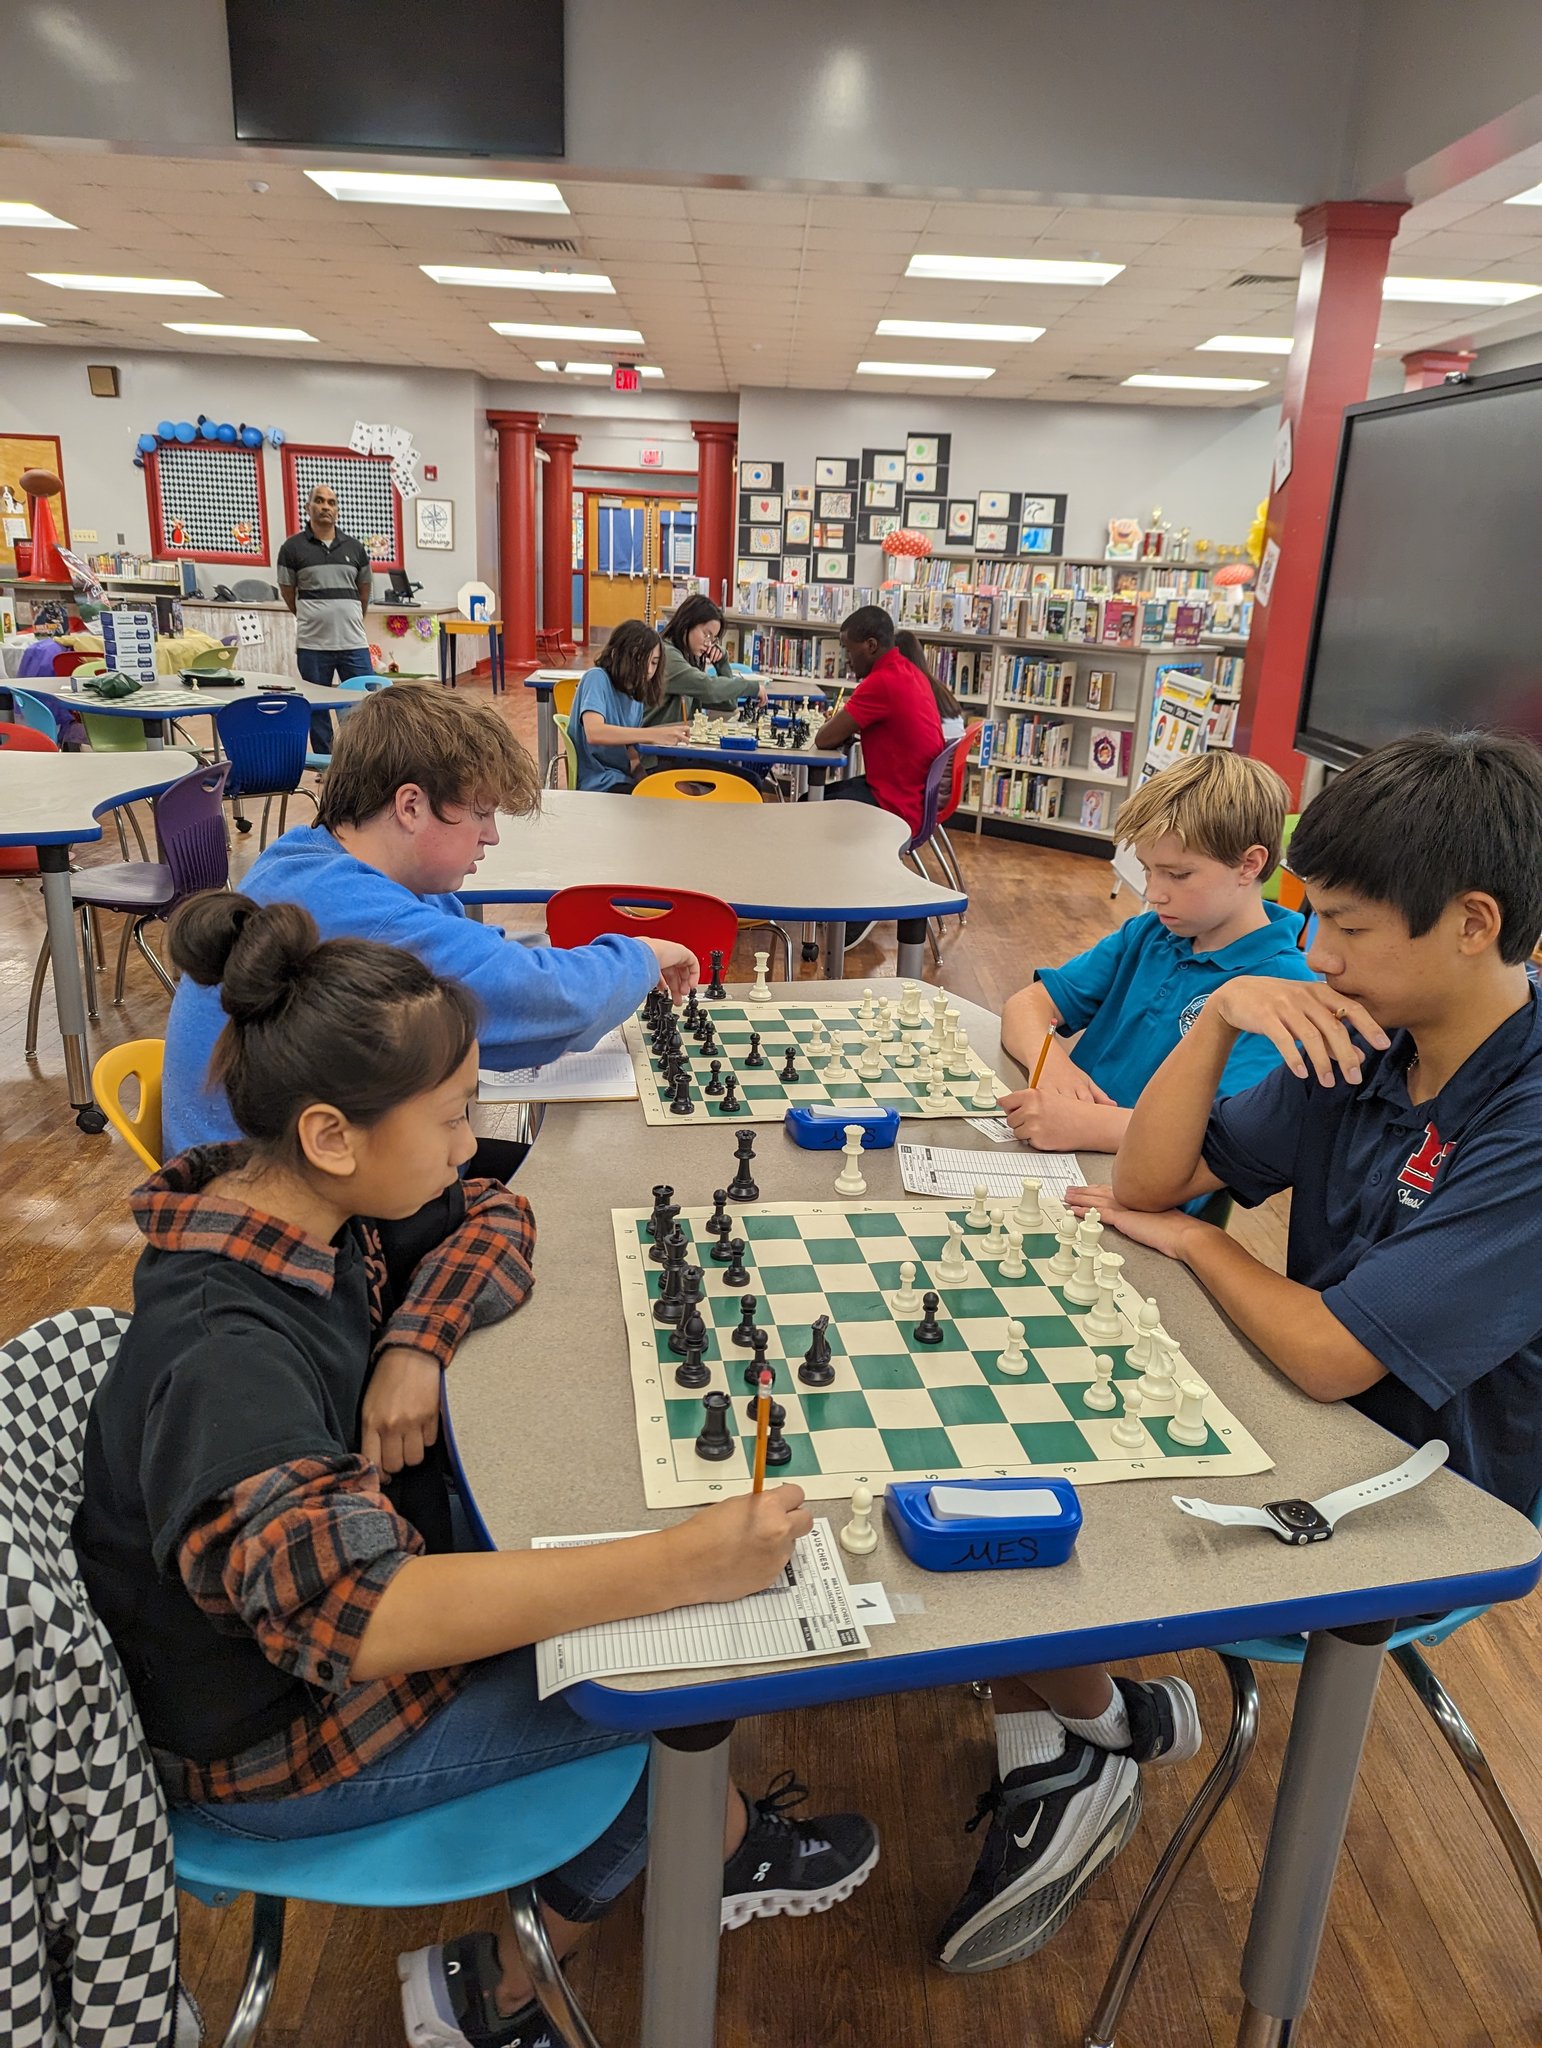 Administration - Madison City Chess League